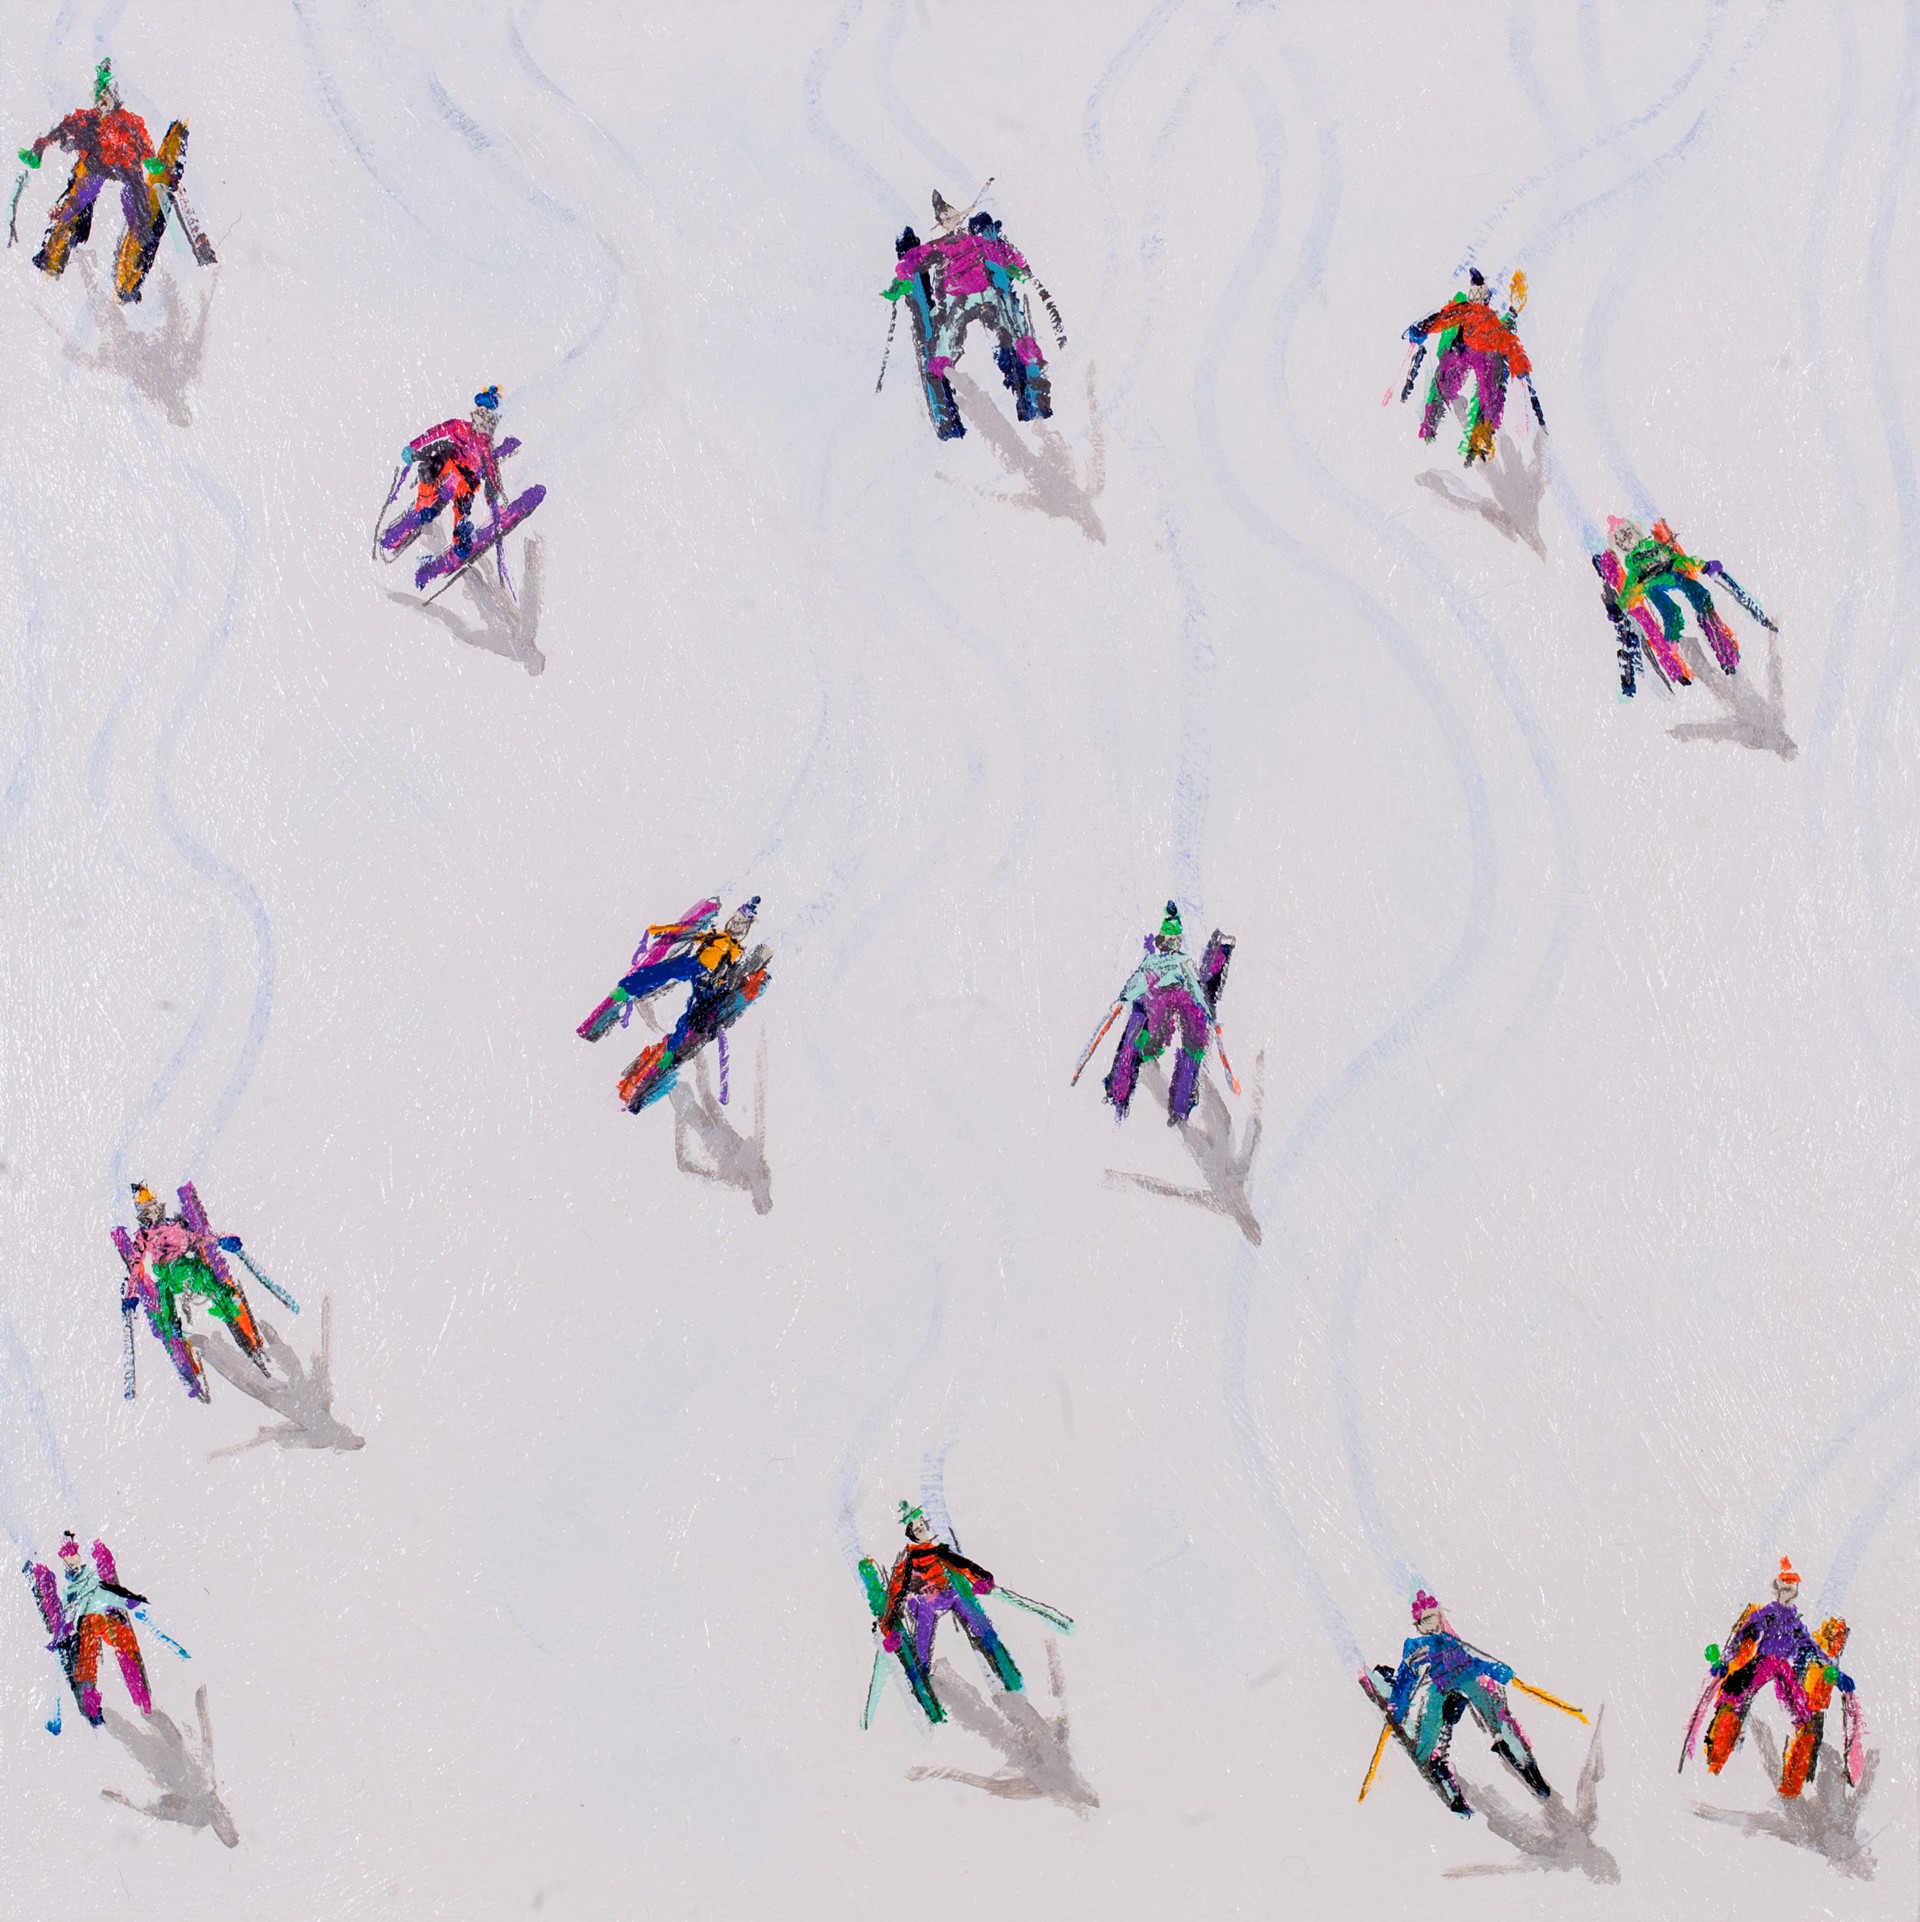 Skiers Square by Heather Blanton